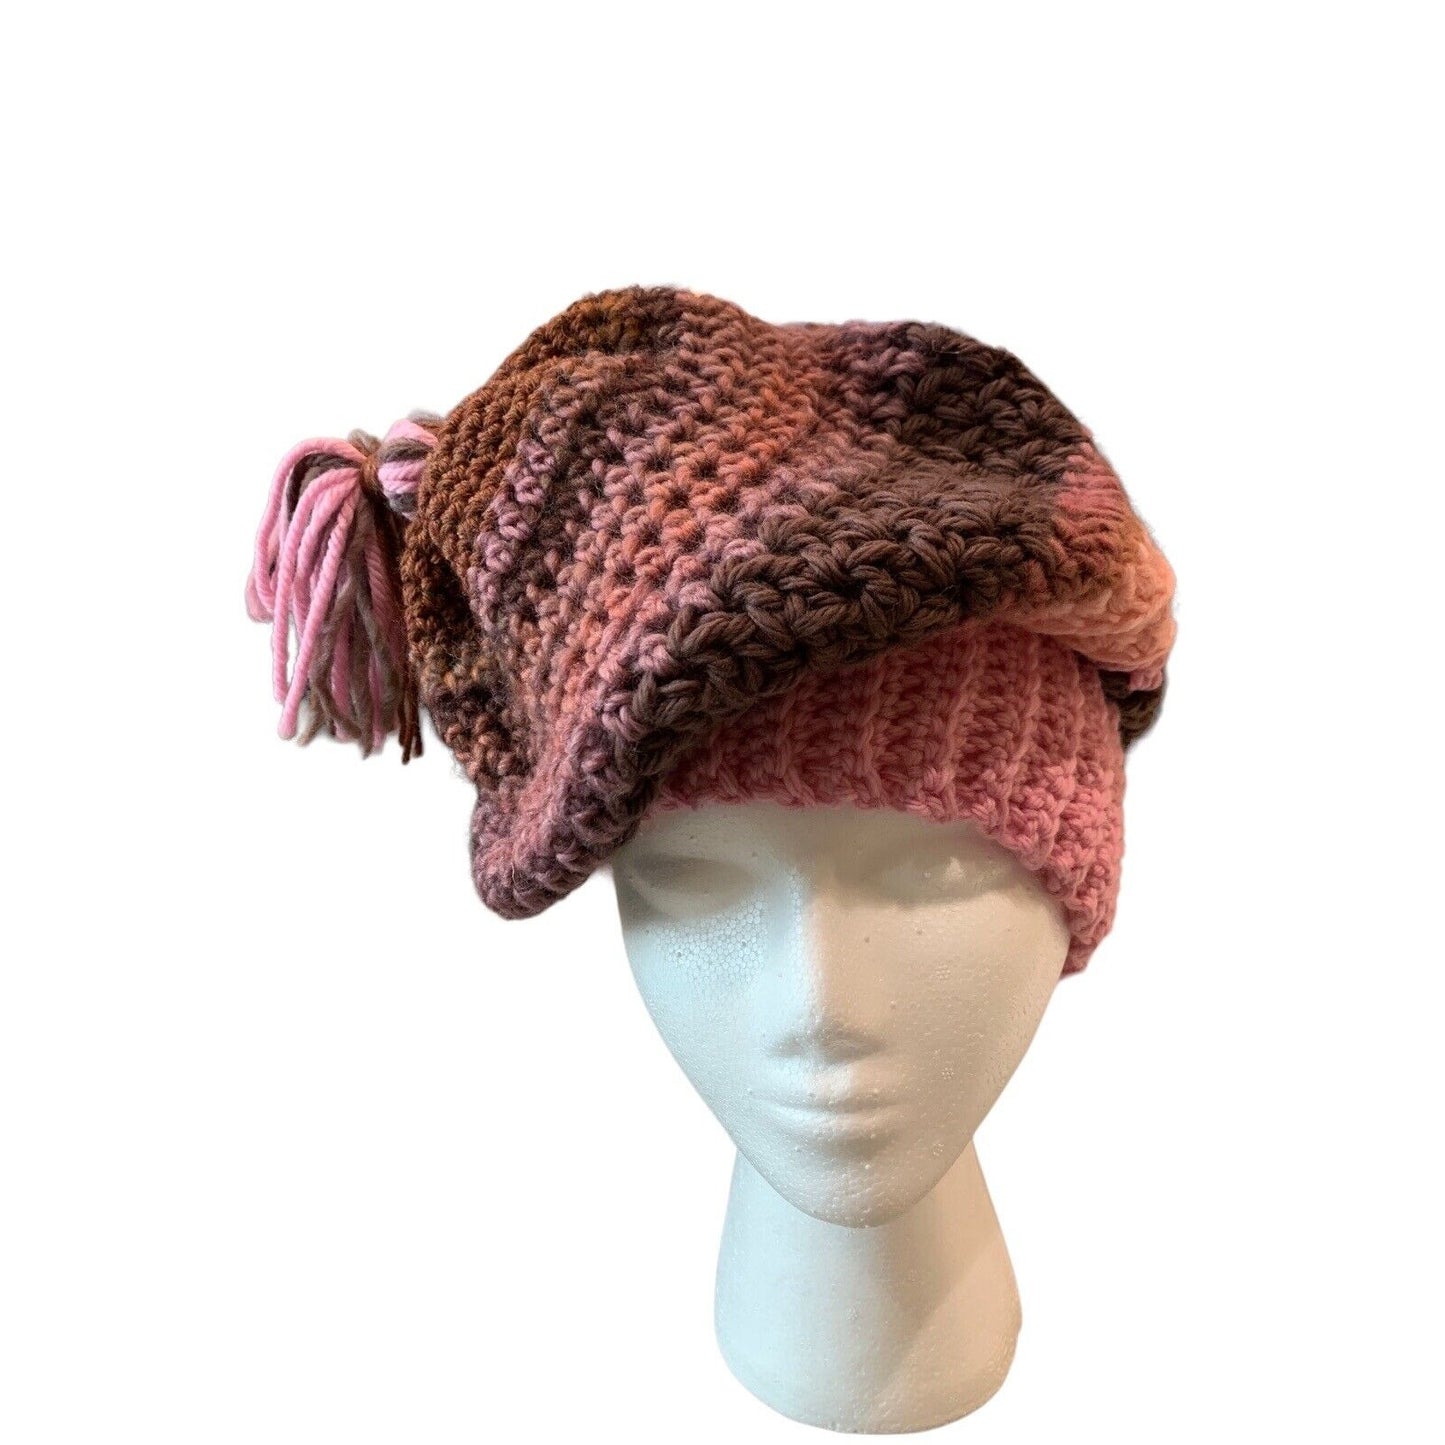 Yarn Gone Wild-Yarn Craft Crochet Hat From the Bang Dang Band Collection